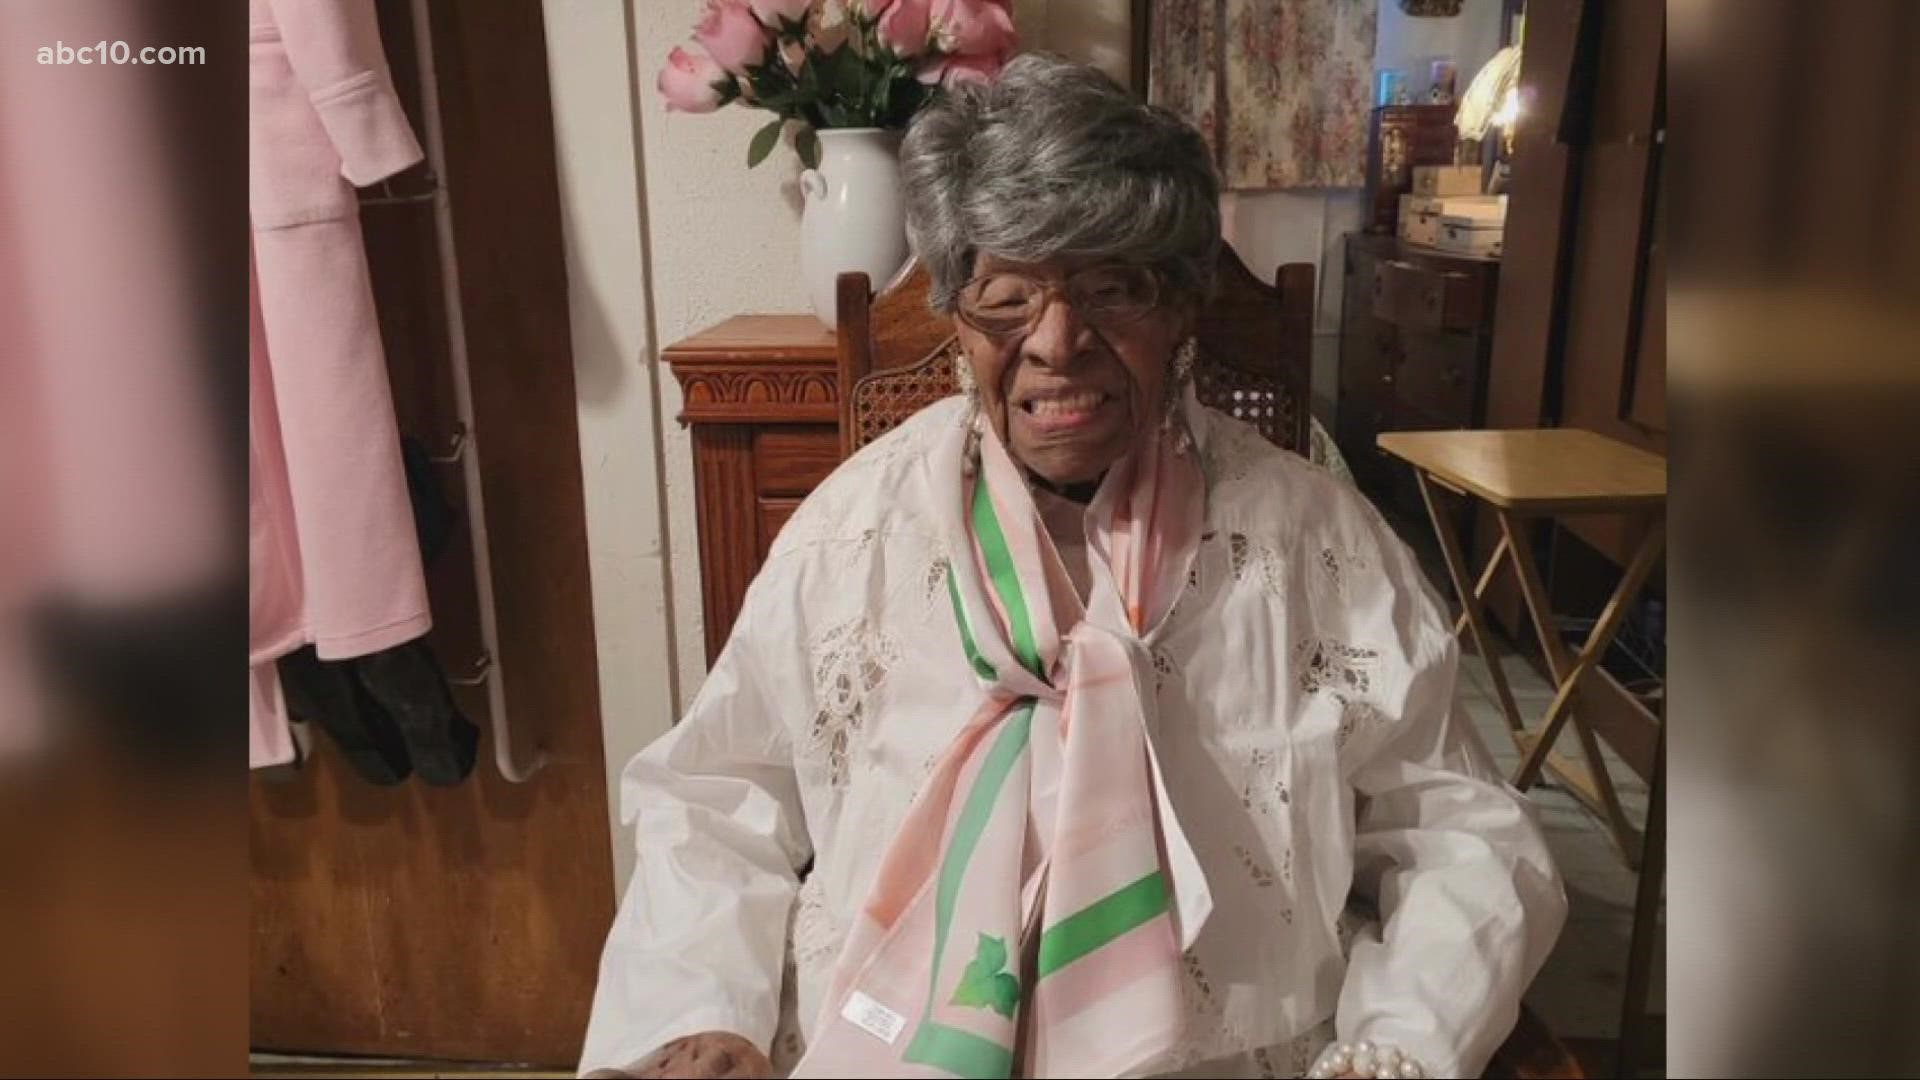 ABC10’s Kurt Rivera takes a look into Wilhelmina Henry’s legacy and the barriers she has broken.